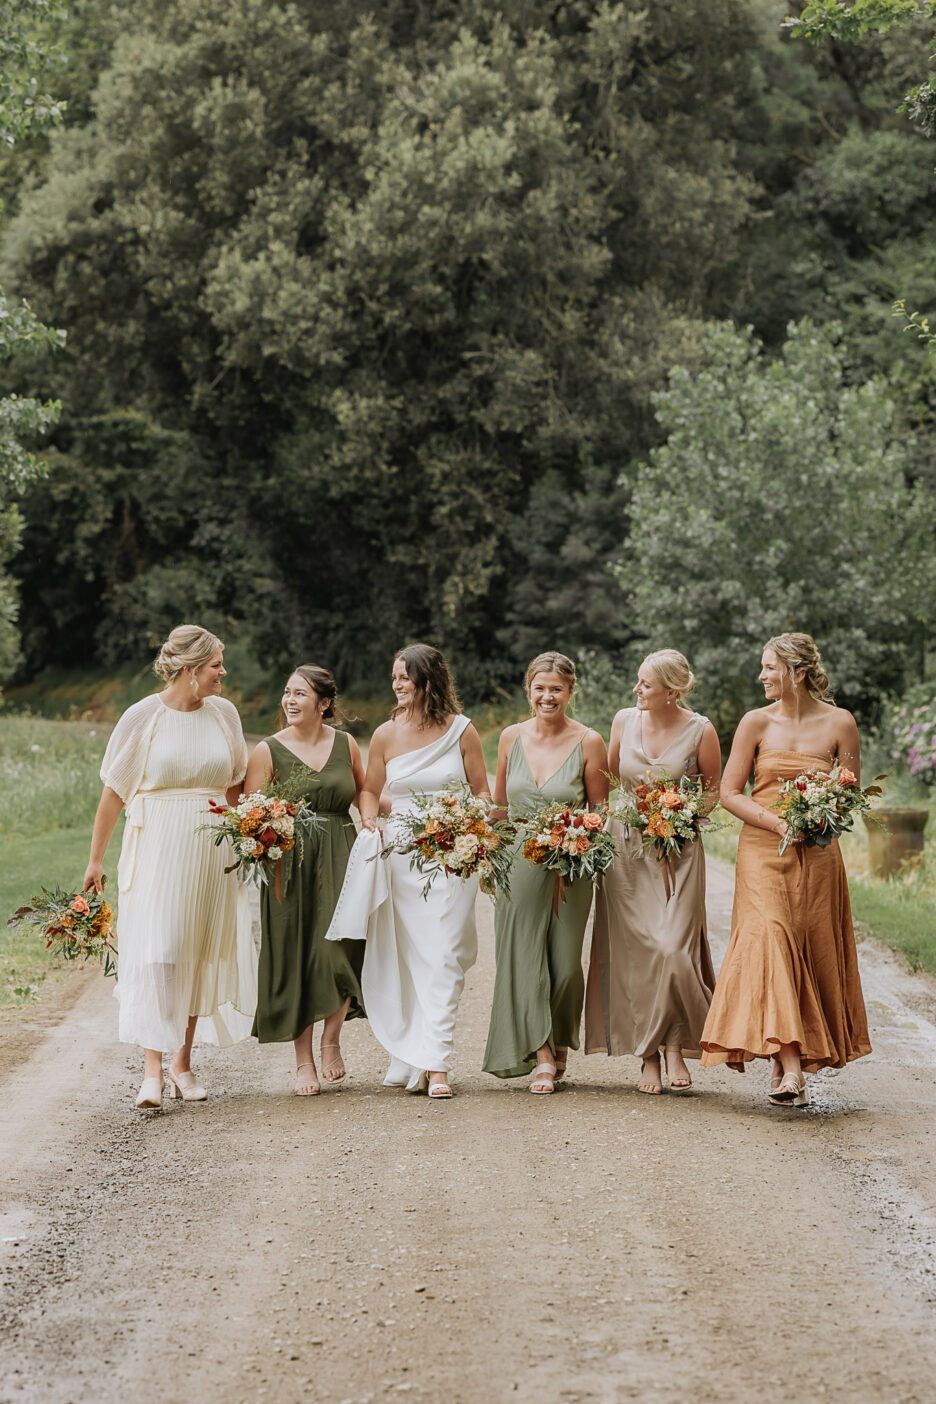 Bridesmaids walking with bride in rustic coloured dresses